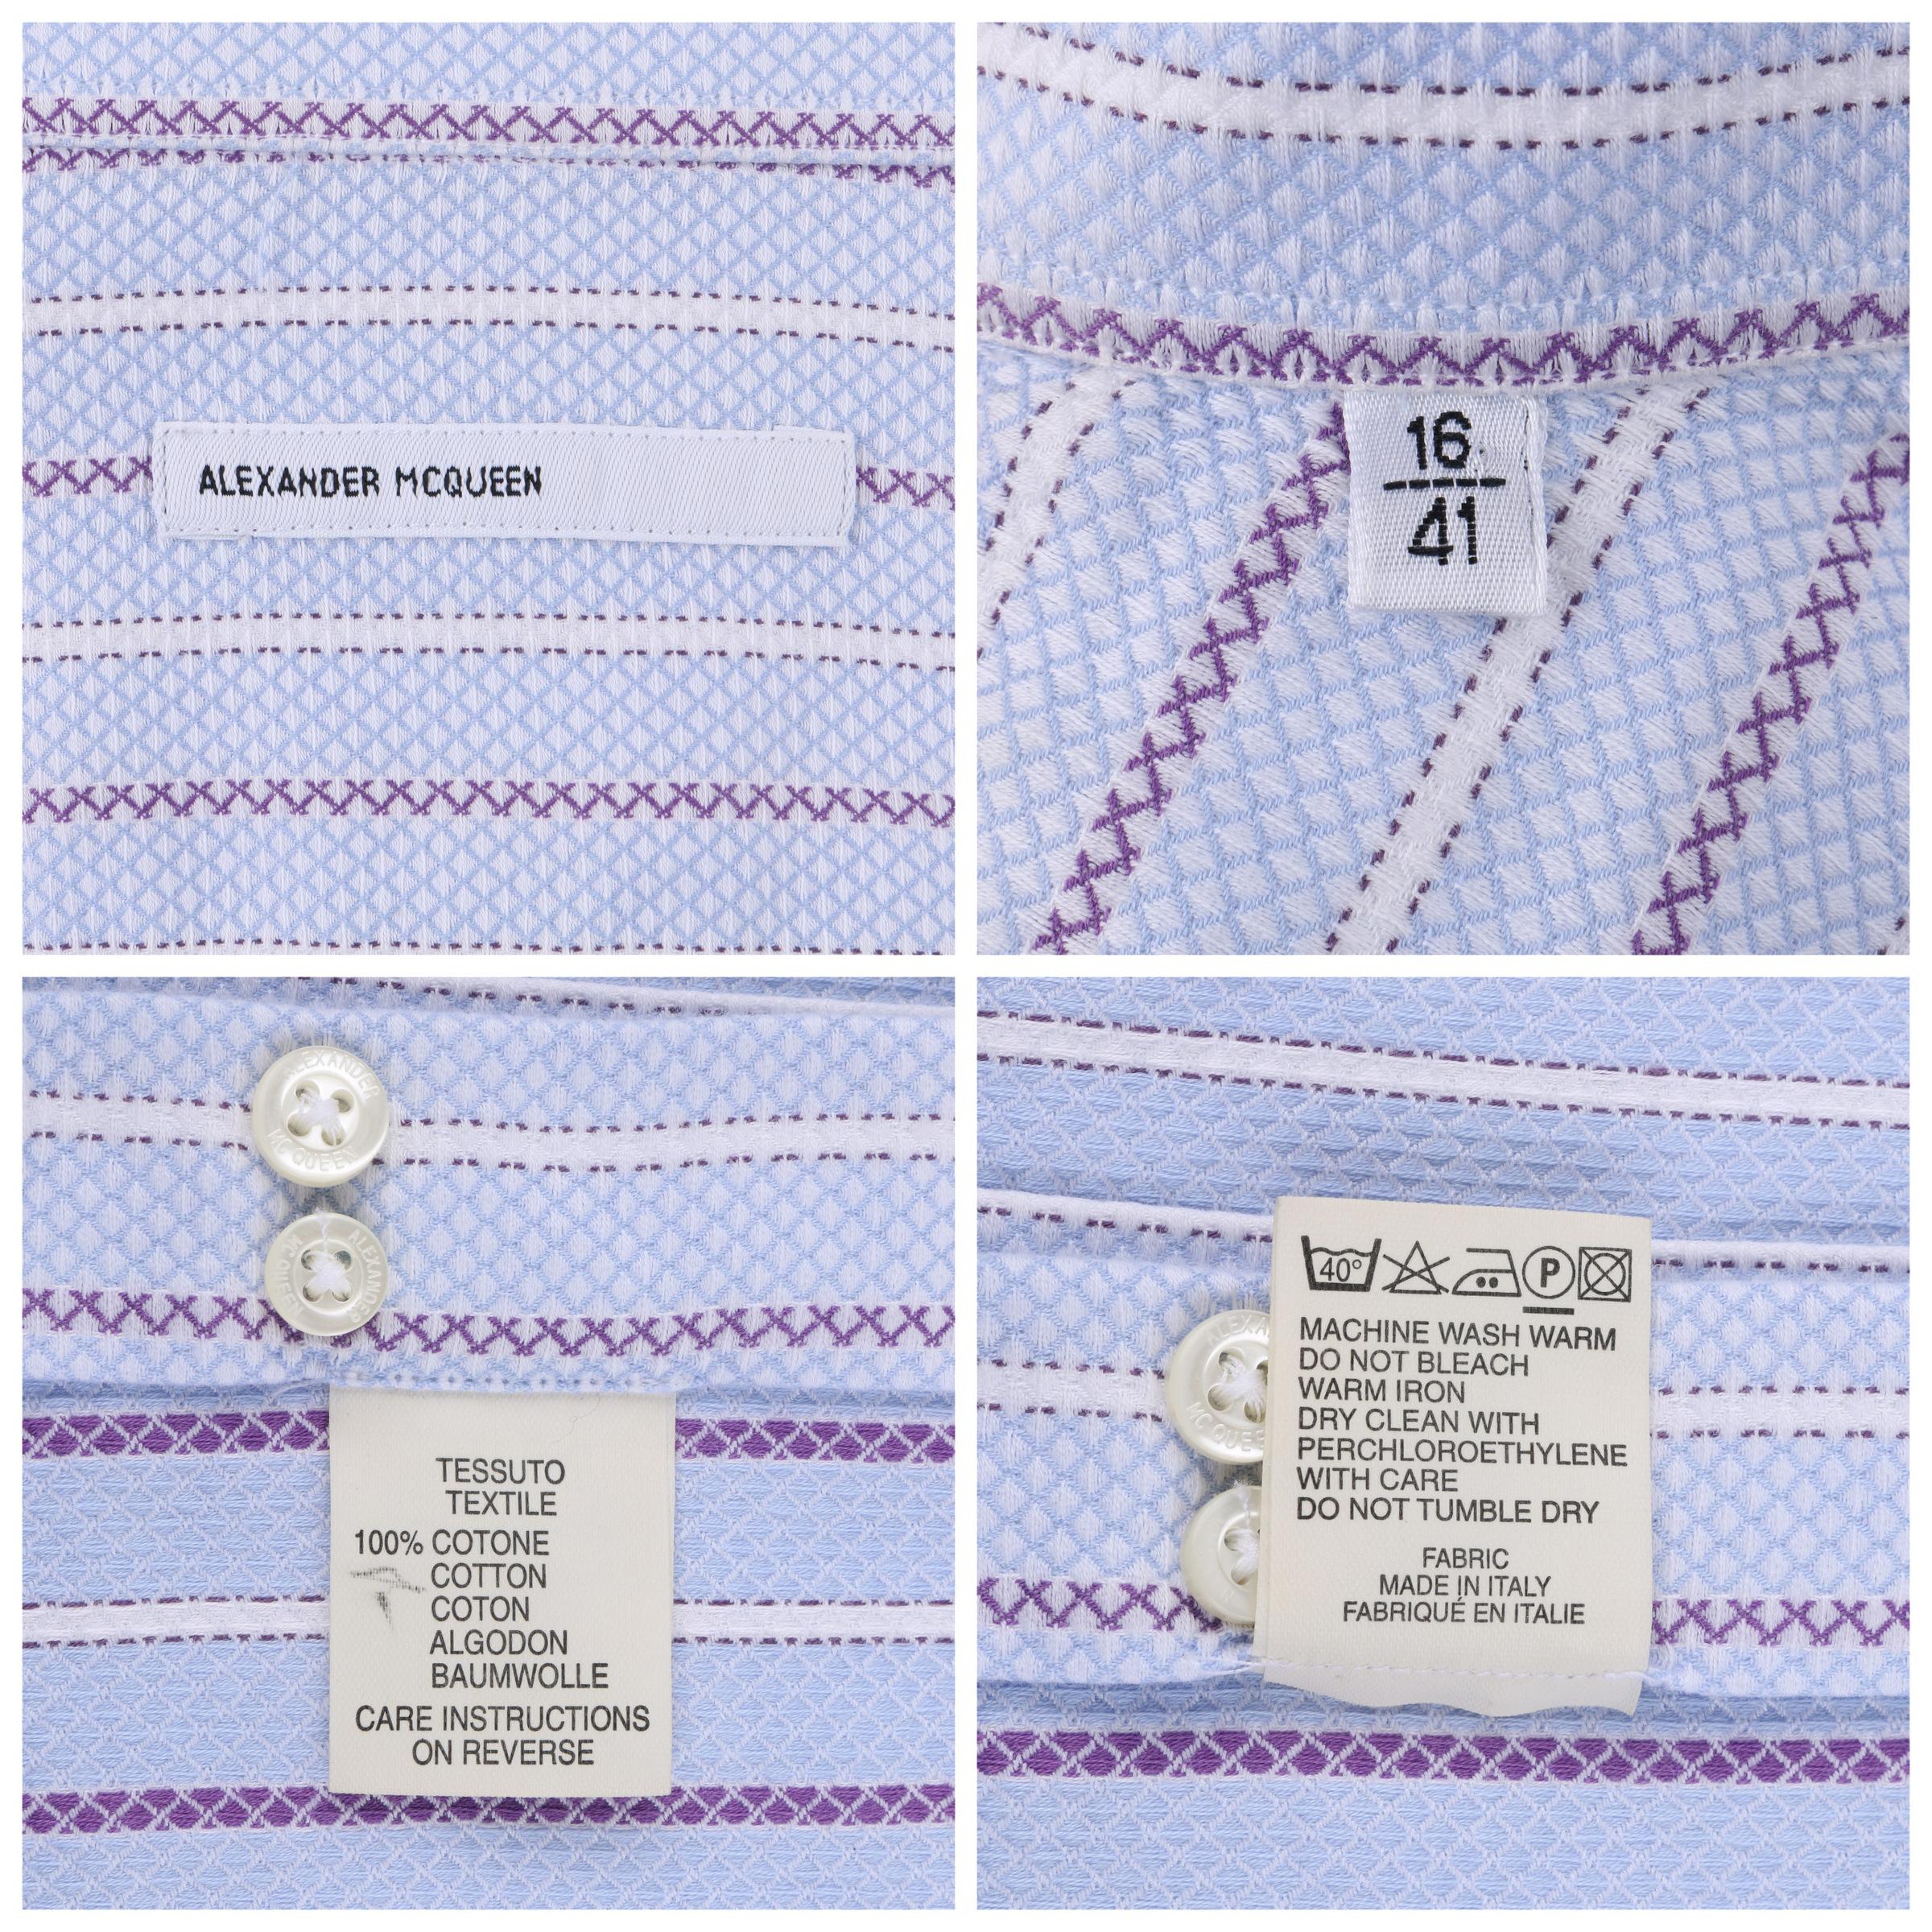 ALEXANDER McQUEEN S/S 1995 Striped Crosshatch Button Front Men's Dress Shirt  In Good Condition For Sale In Thiensville, WI